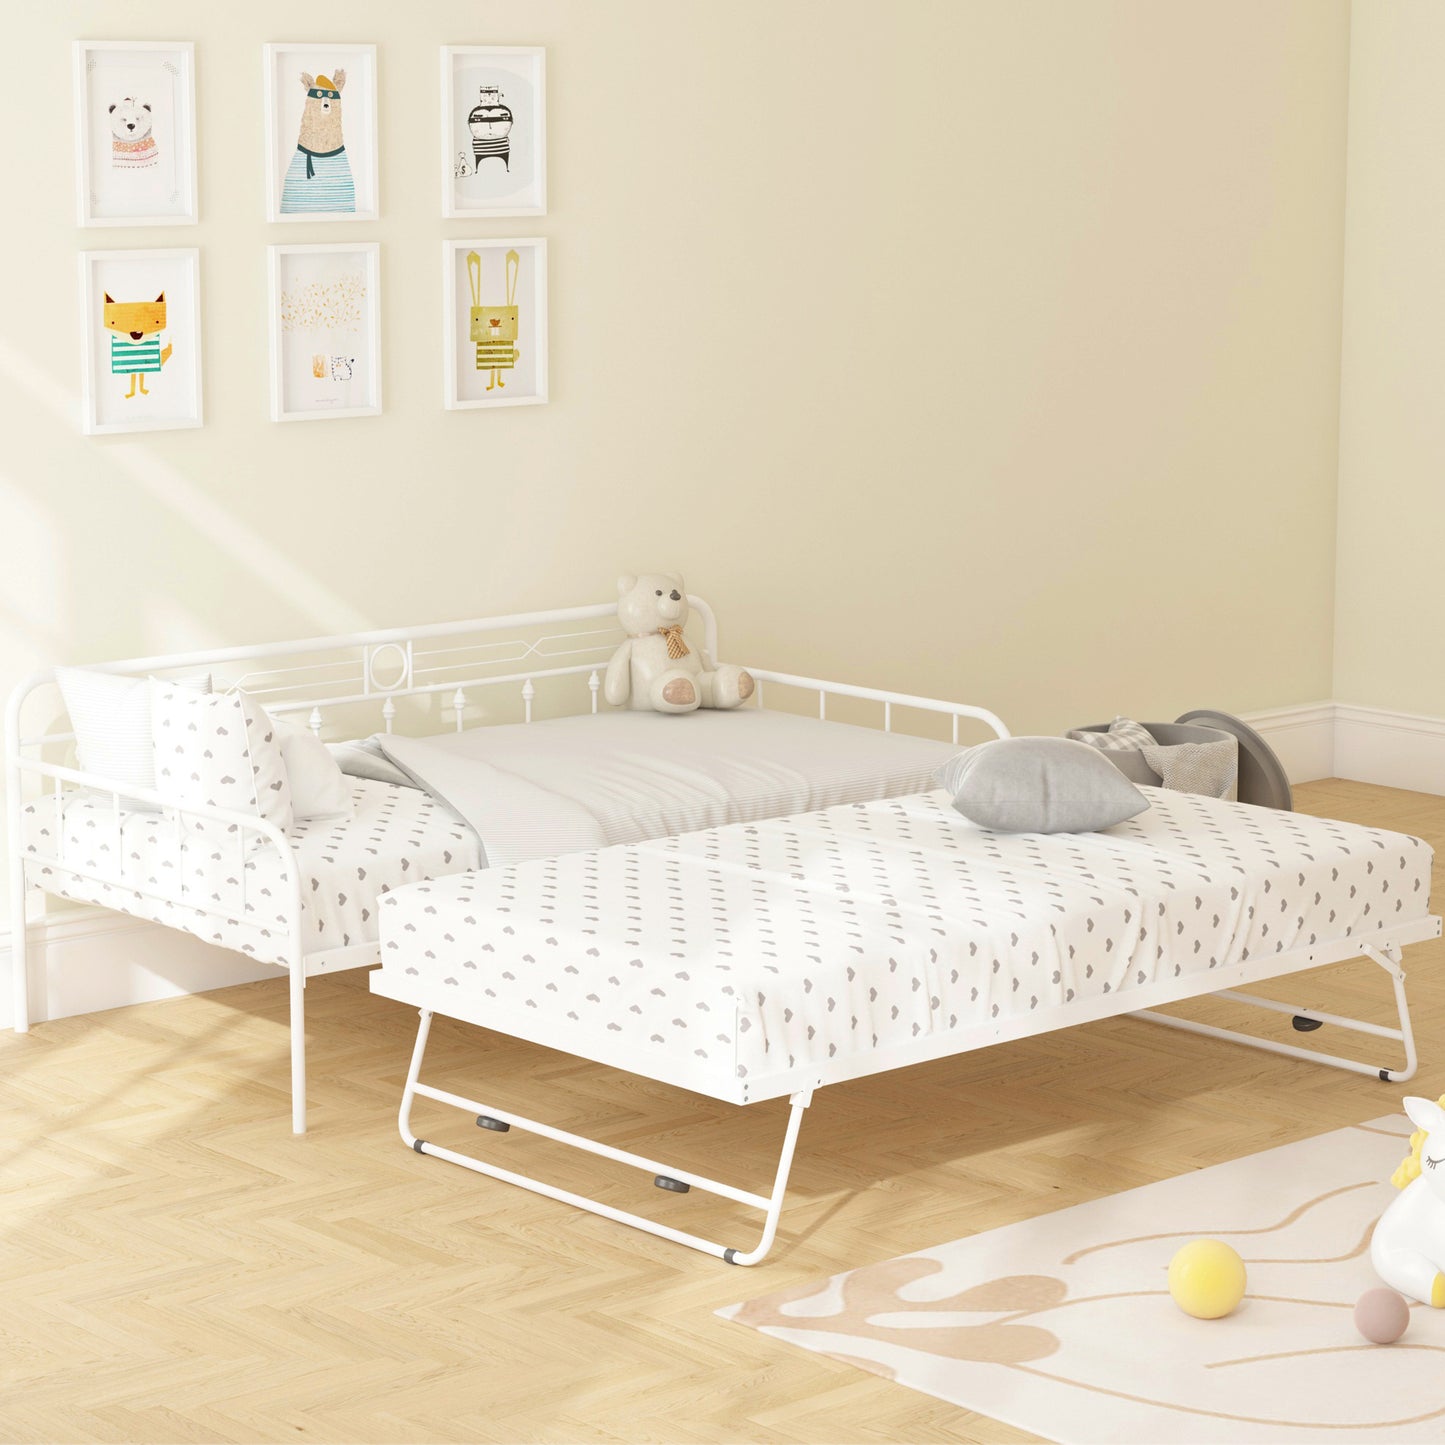 SYNGAR Daybed with Trundle, Twin Size Metal Daybed with Pop Up Trundle, Sofa Bed Day Beds Frame, Bedroom Living Room Furniture for Kids Boys Girls Adults Guest, White